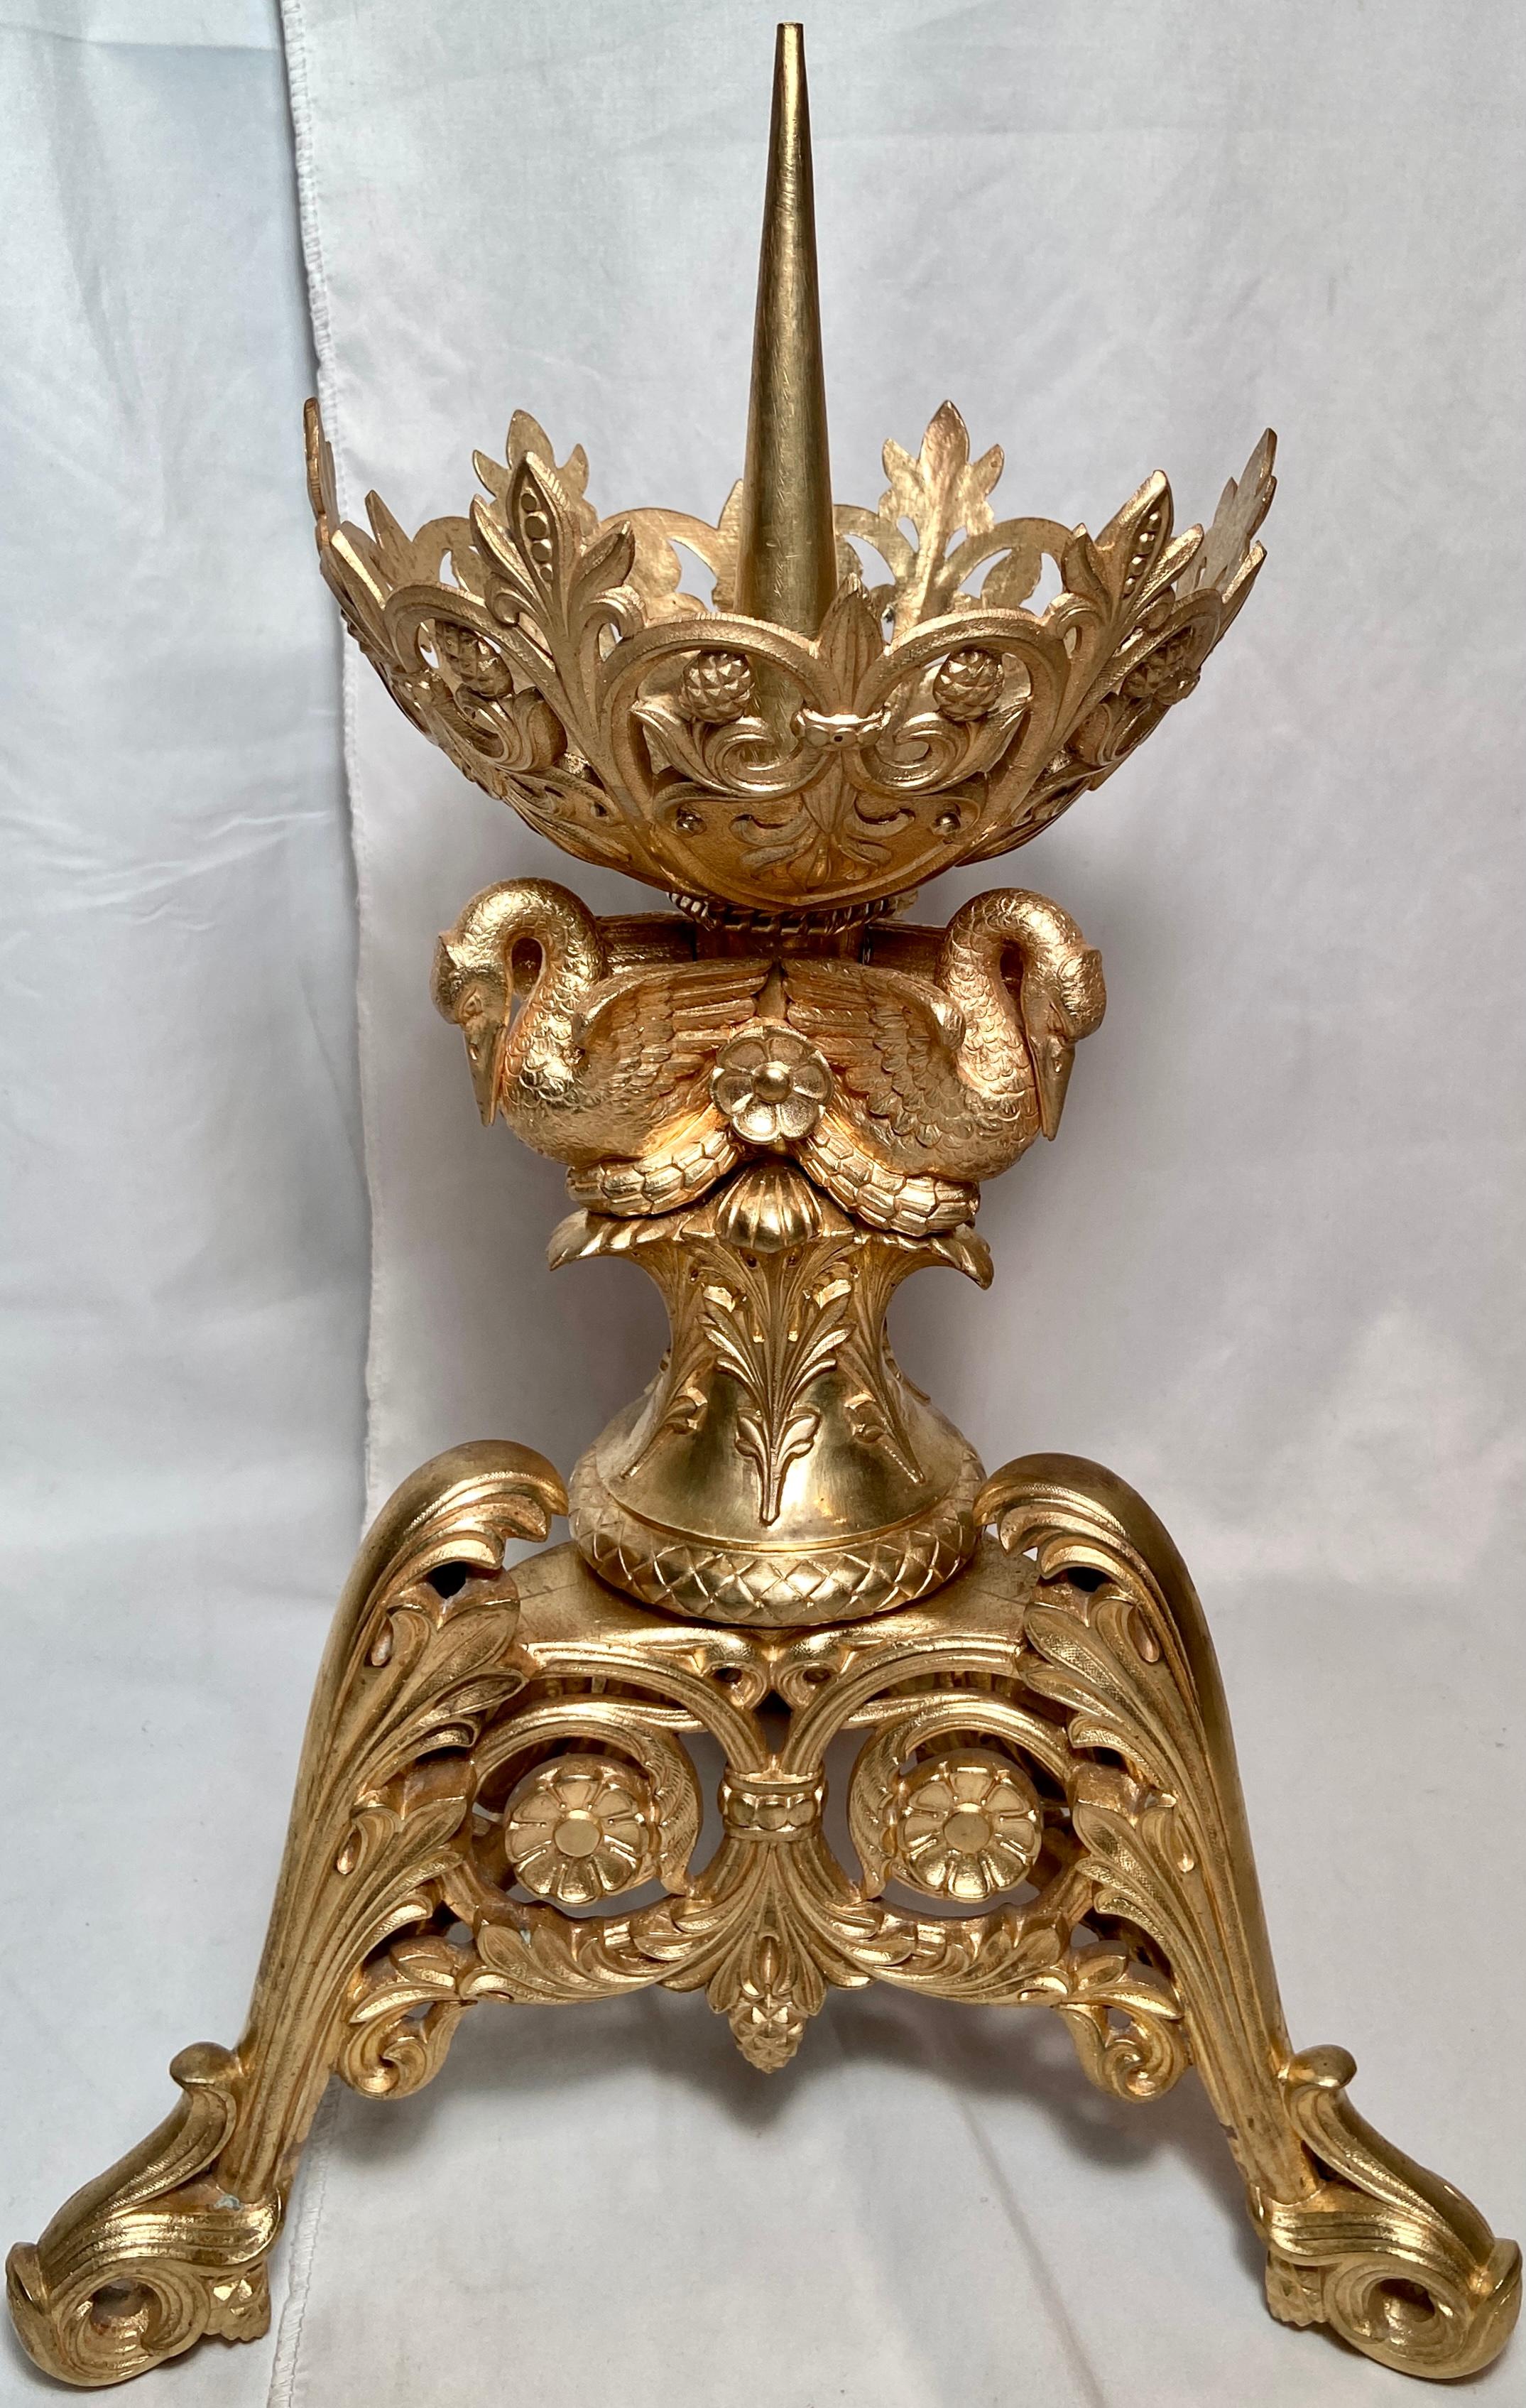 Set of 4 exceptional antique early 19th century gold bronze chateau candle holders with swans. Wonderful large size and carving.
May be sold as a pair.